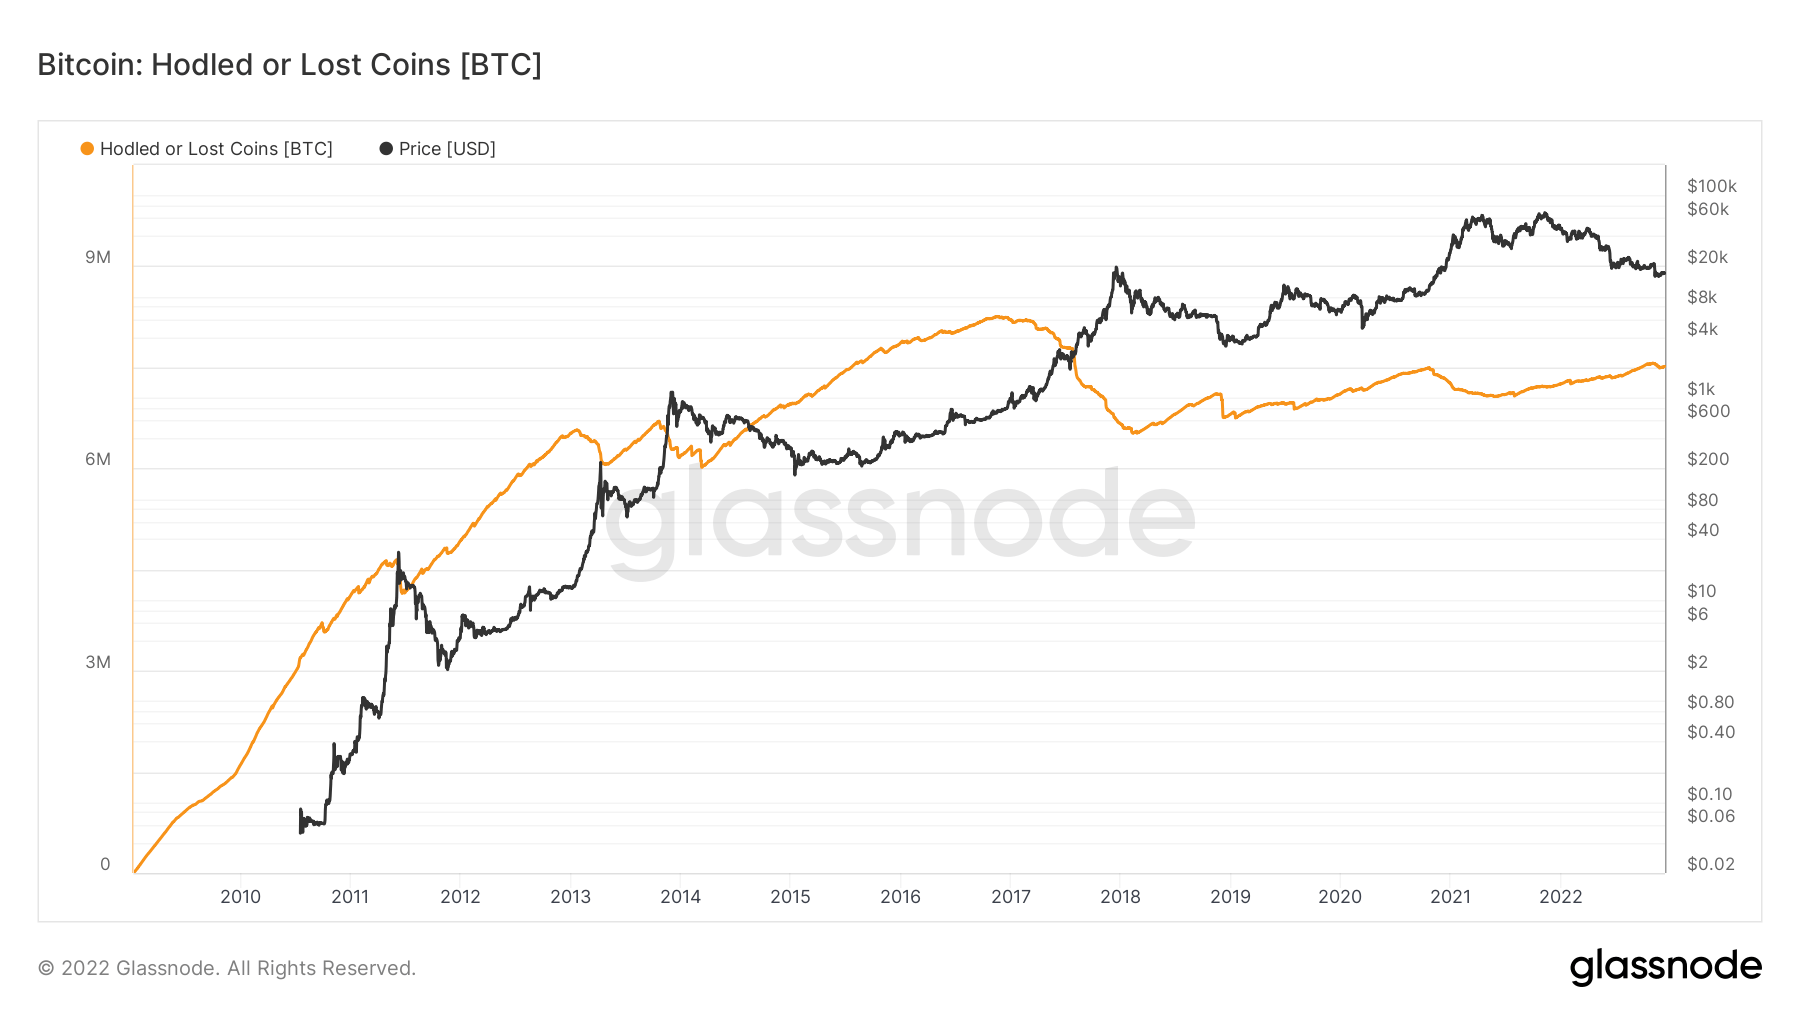 Holding or Losing Bitcoin